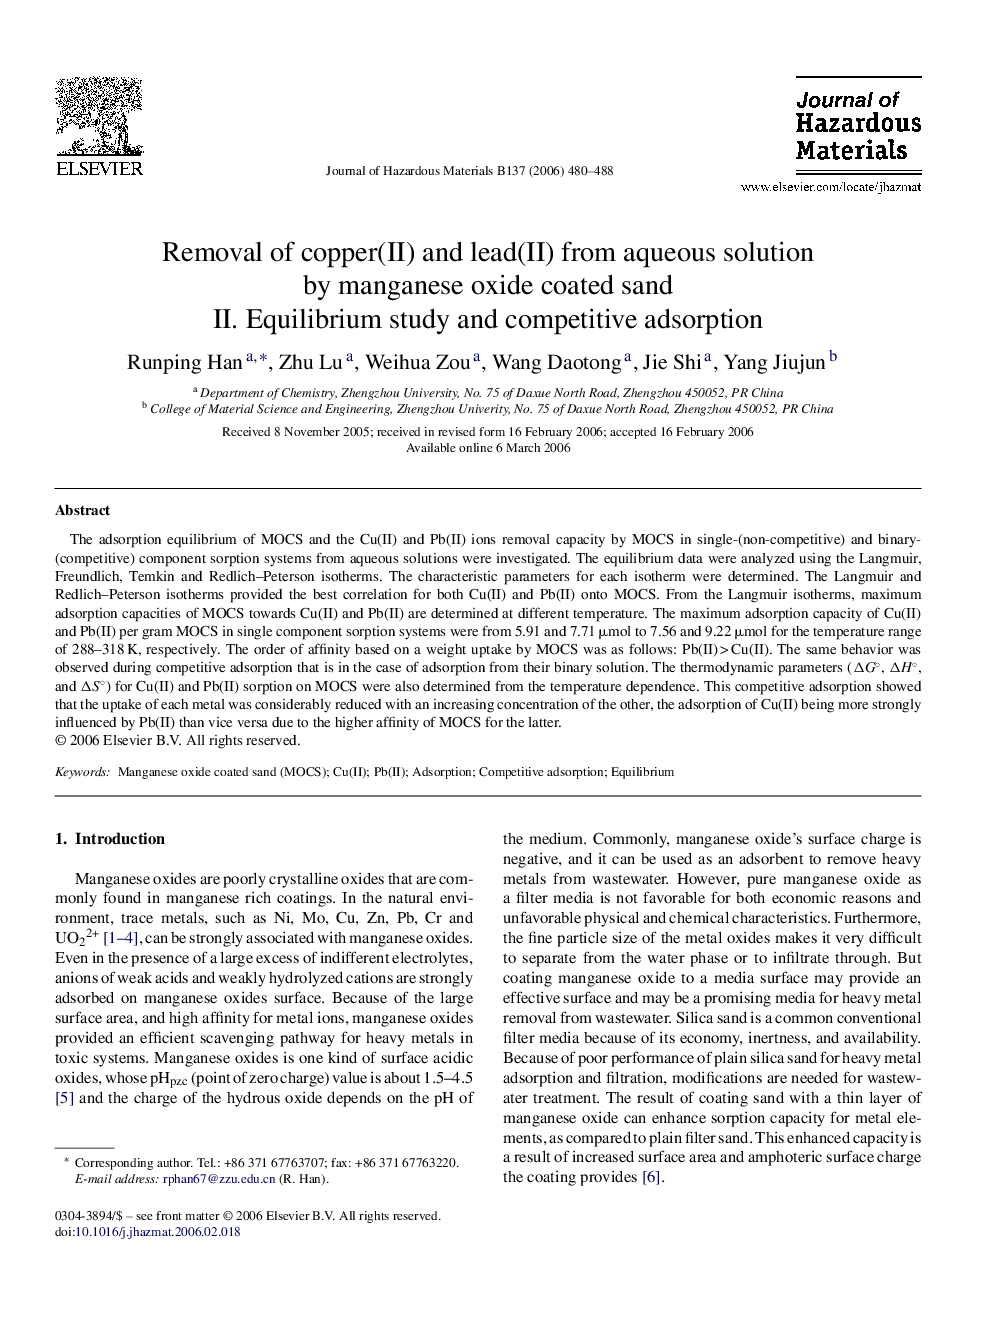 Removal of copper(II) and lead(II) from aqueous solution by manganese oxide coated sand